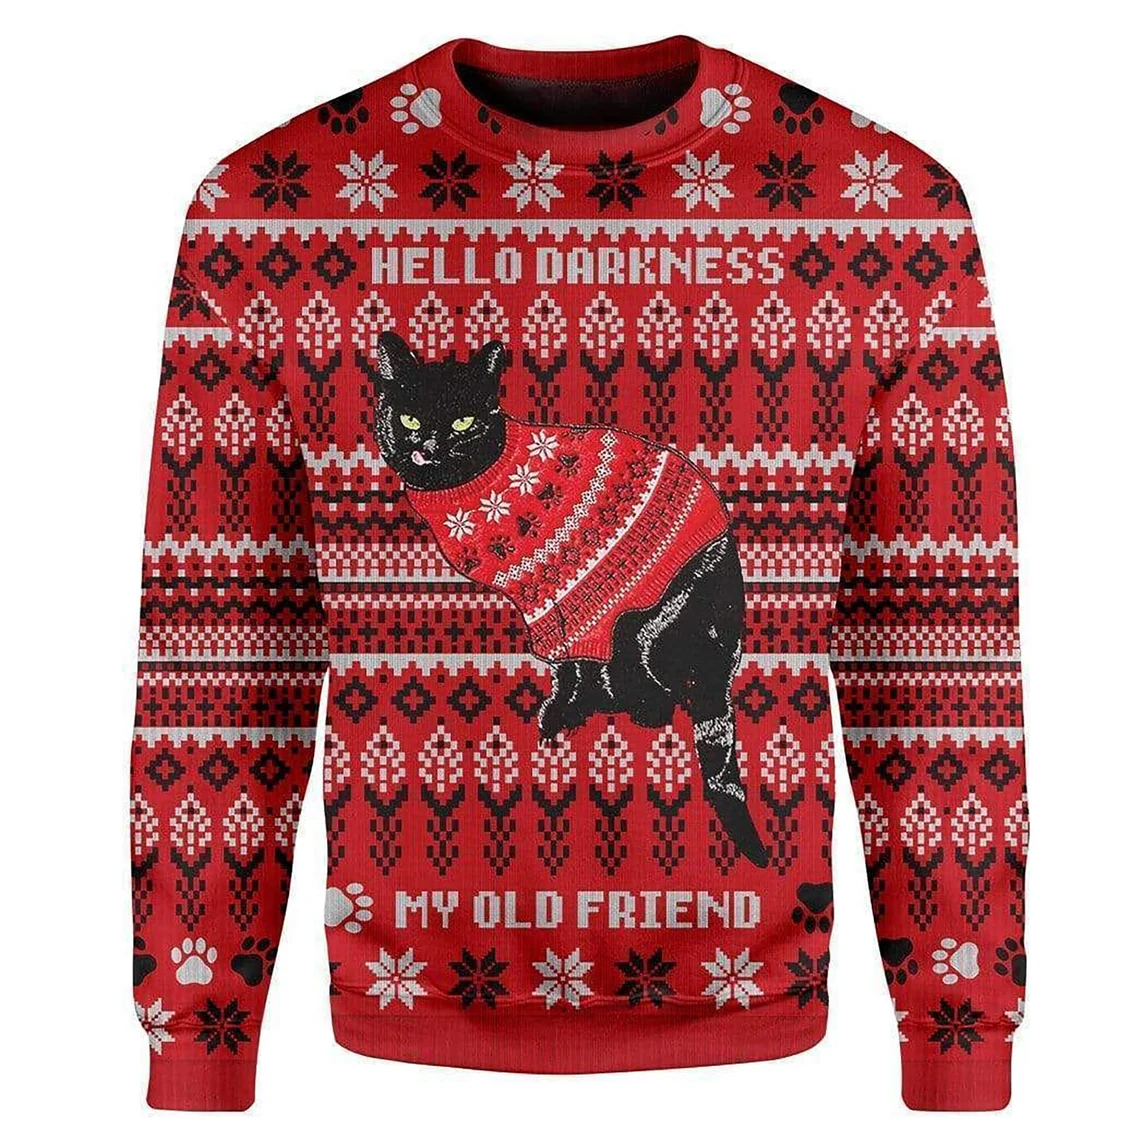 3D Black Cat Wear Red Sweater Christmas Sweater